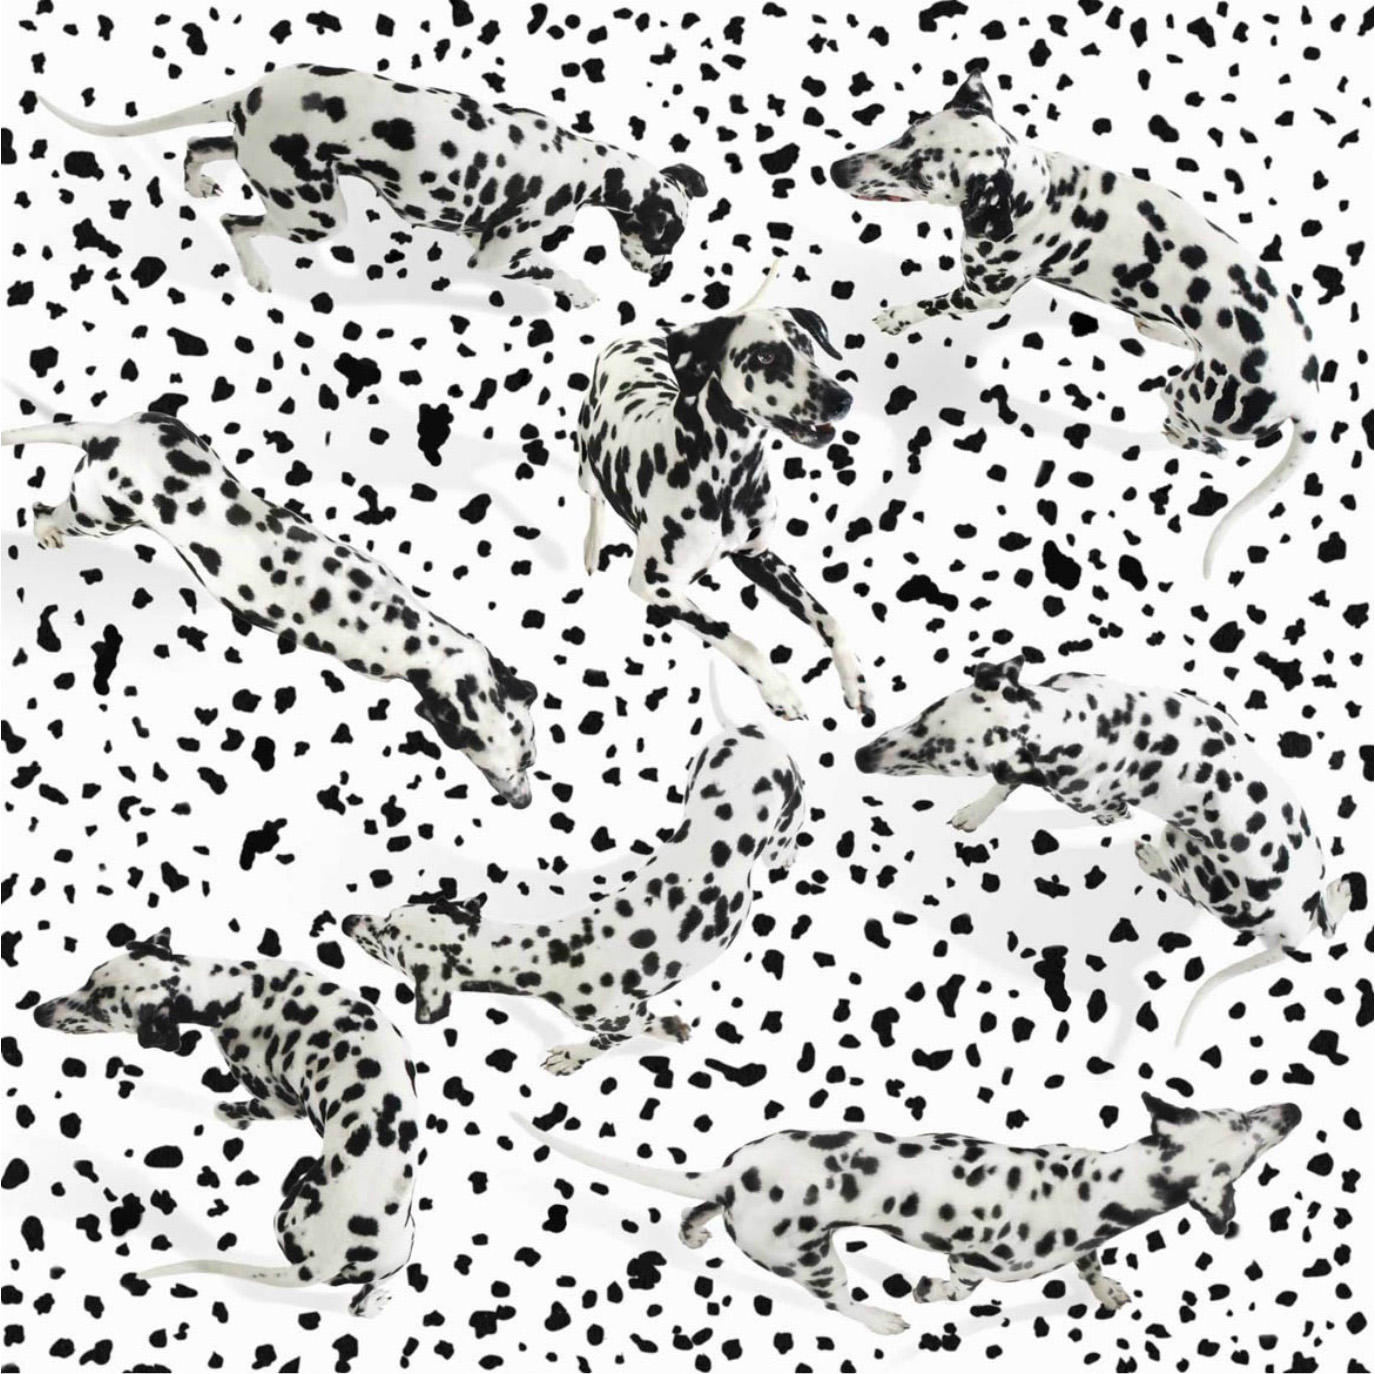 Spotted Dalmatian dogs walking around in a pattern of dots. One leaping up. CopyrightGandeeVasanDog13